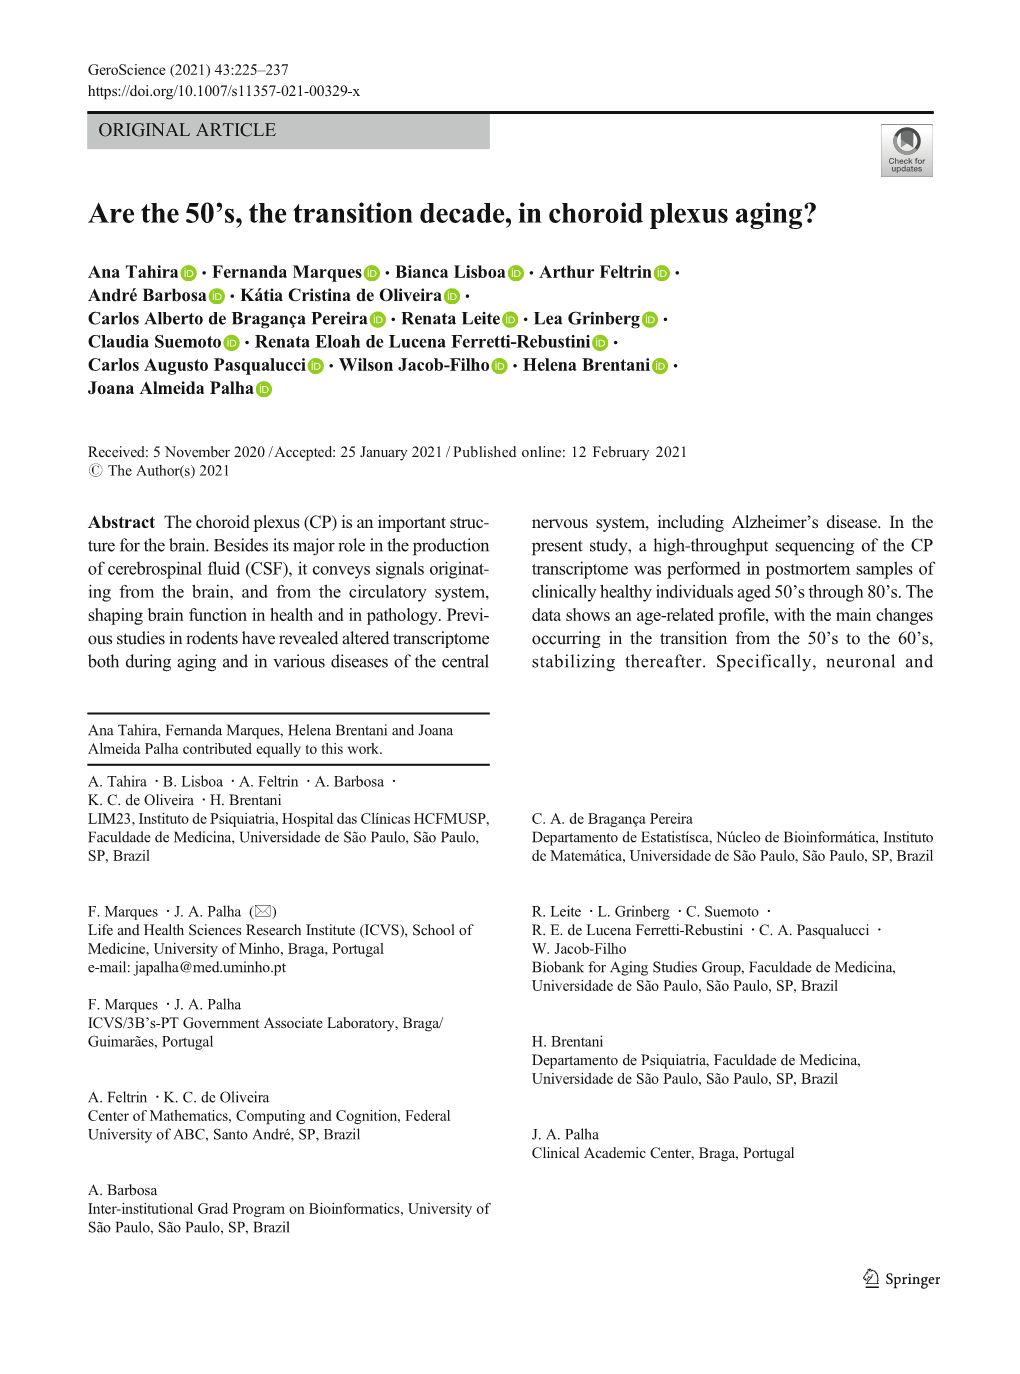 Are the 50'S, the Transition Decade, in Choroid Plexus Aging?